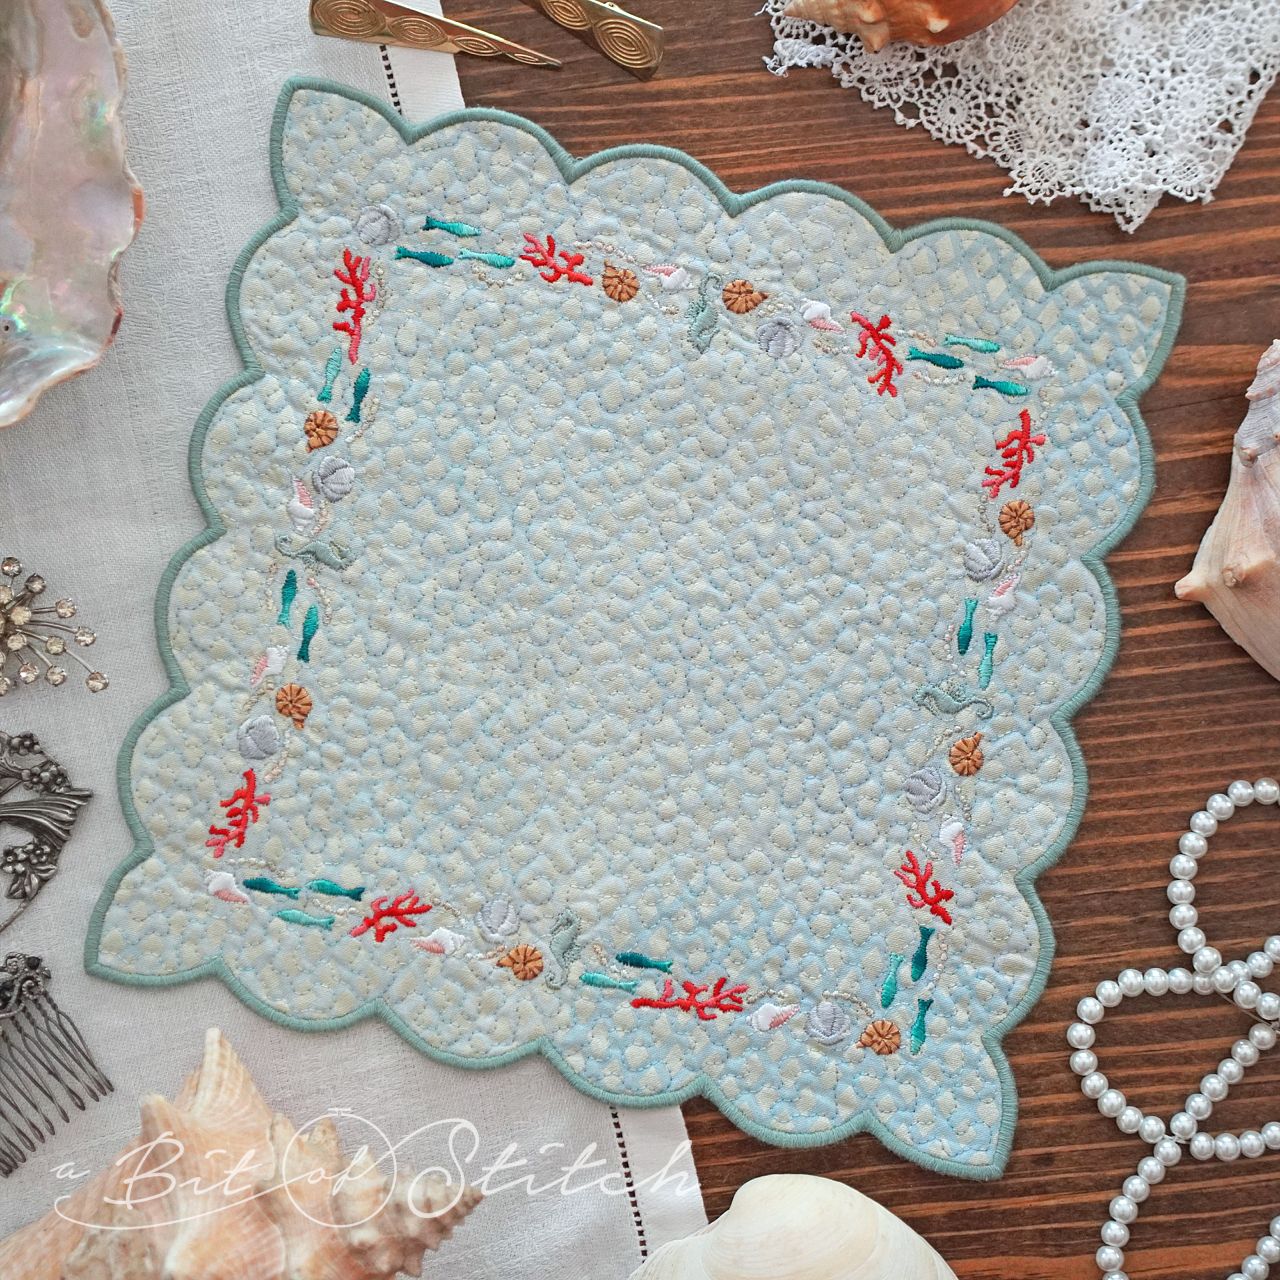 Ocean sea beach themed square frame machine embroidery design by A Bit of Stitch from Fancy Frames design collection